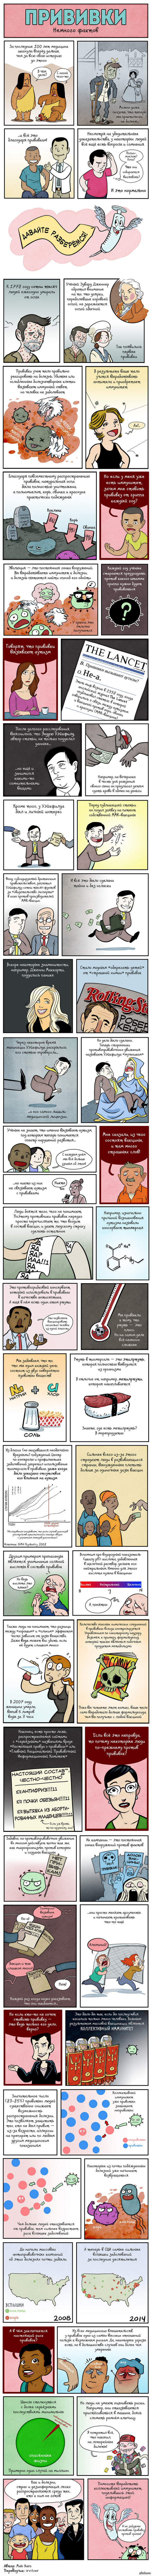   (17   ).   ,  .  : https://thenib.com/vaccines-work-here-are-the-facts-5de3d0f9ffd0